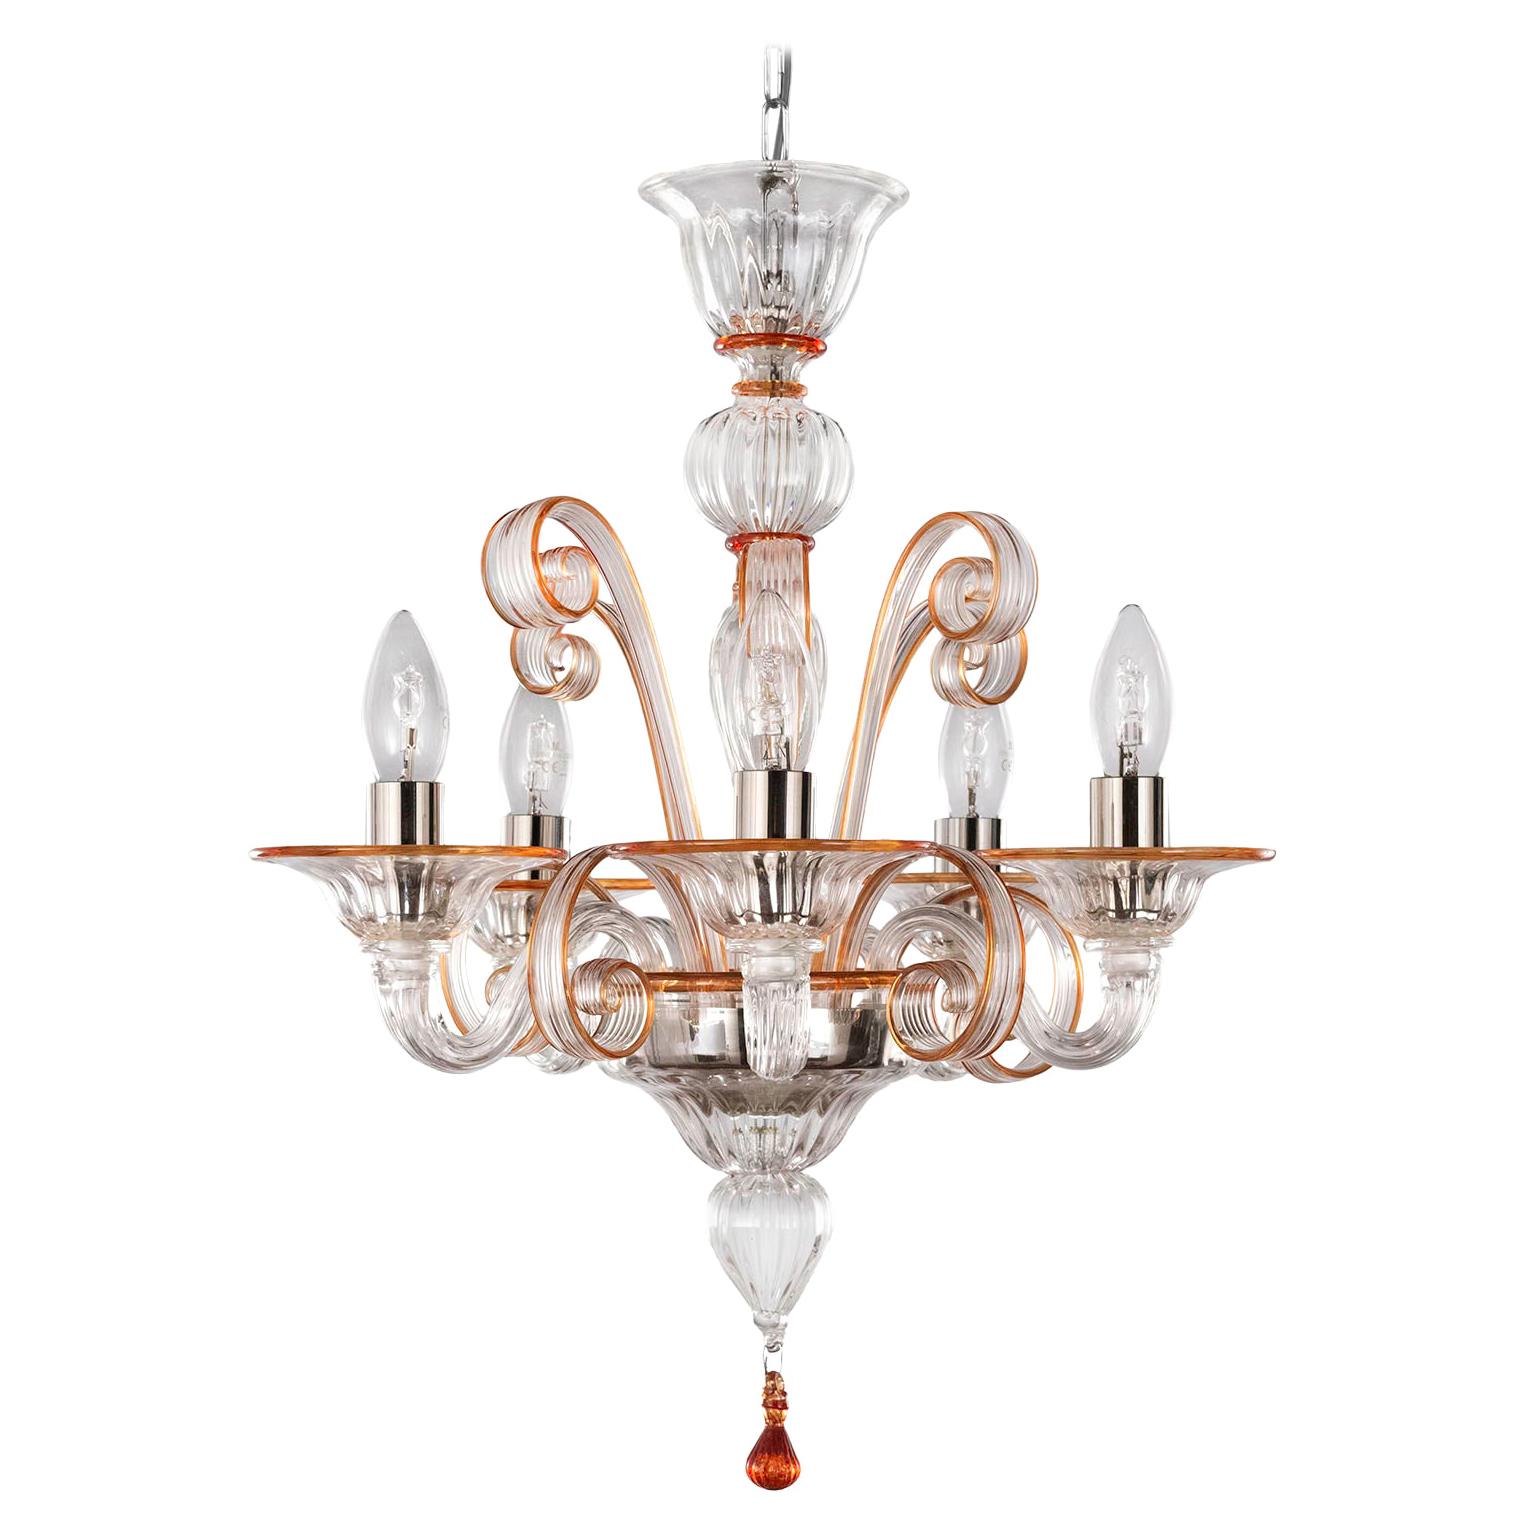 Chandelier 5 Arms Clear Murano Glass, Orange Details by Multiforme